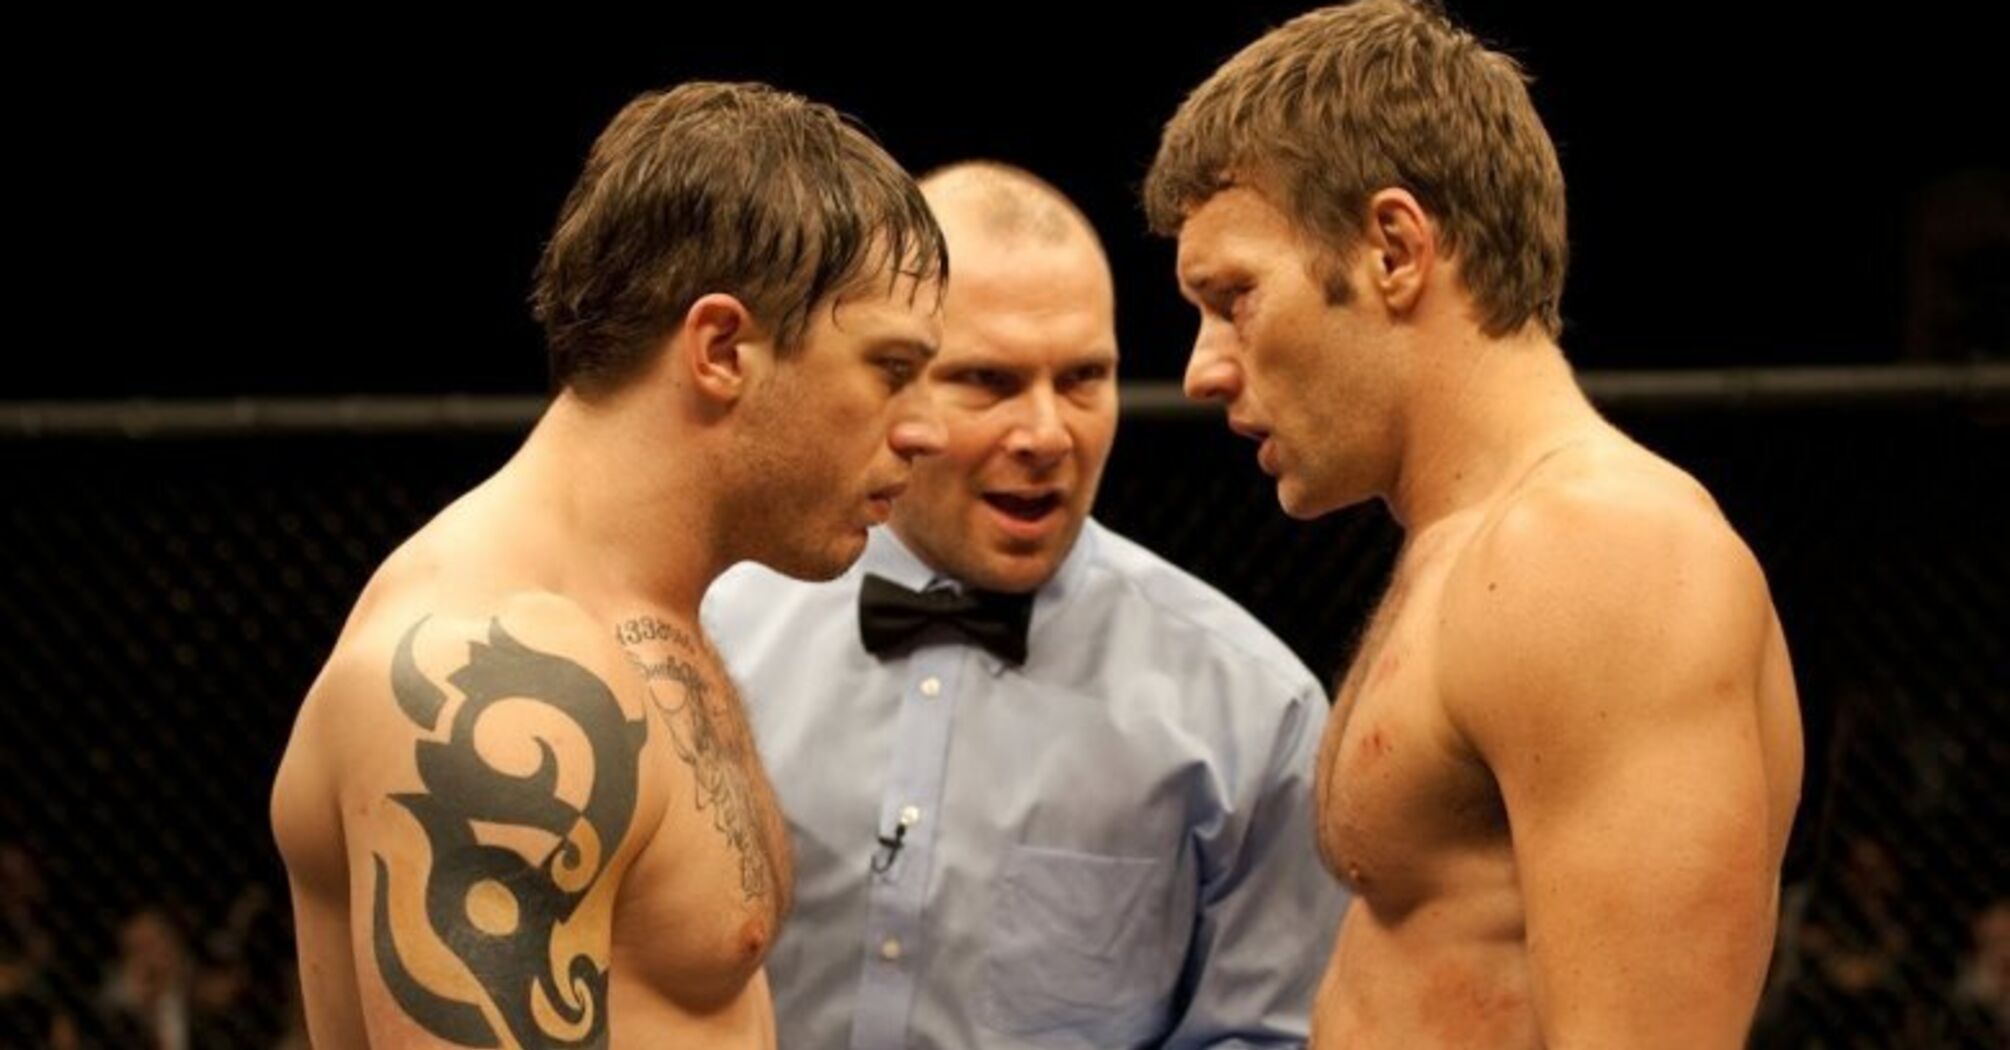 The Top 5 Tom Hardy Movies, Ranked